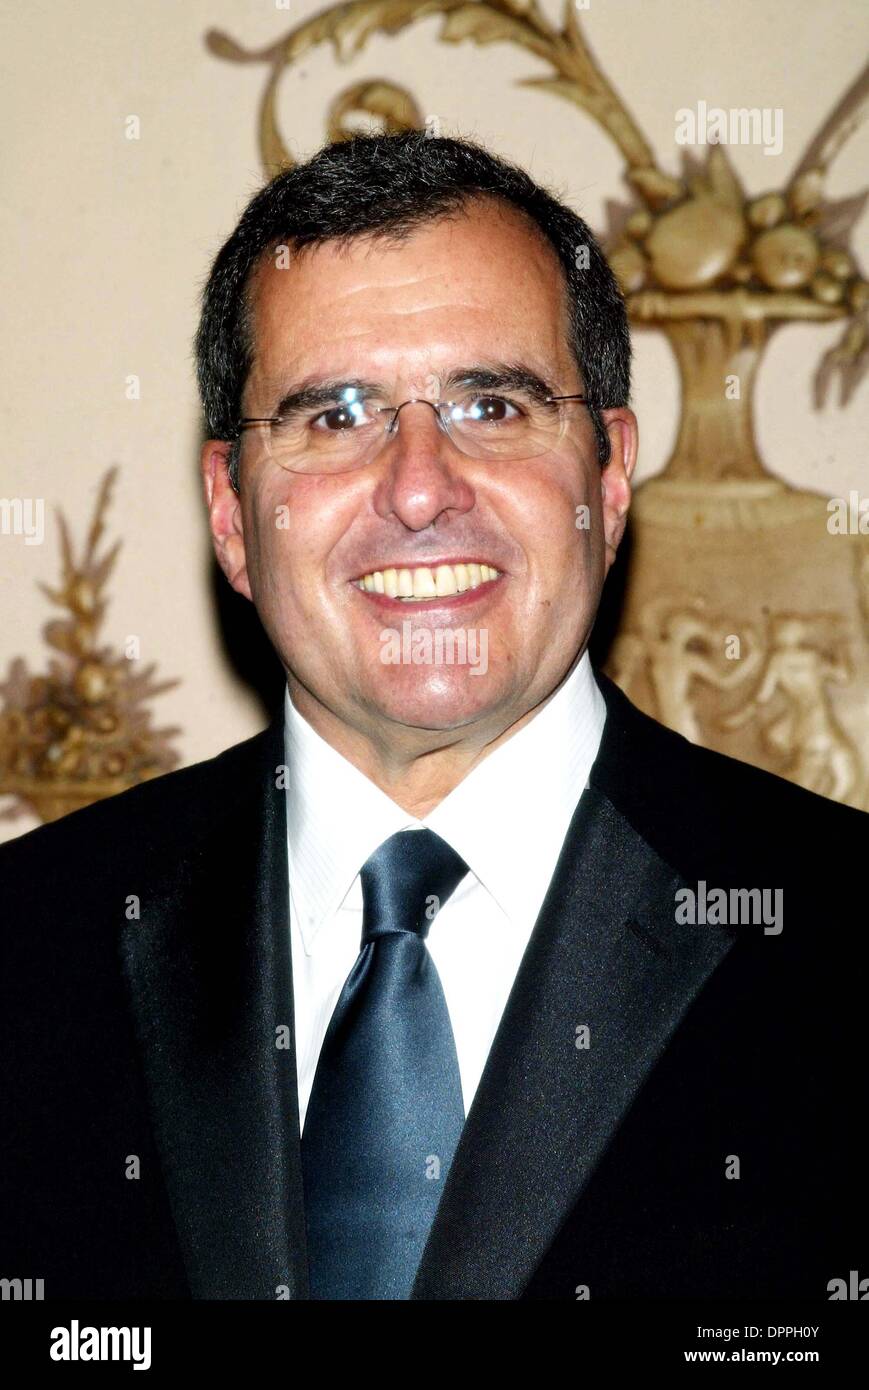 Oct. 23, 2006 - New York, NY, UNITED STATES OF AMERICA - Peter Chernin, President and COO of News Corporation and Chairman and CEO of The Fox Group, arrives for the 16th Annual Broadcasting & Cable Hall of Fame Awards Dinner at the Waldorf Astoria in New York on October 23, 2006...LCV/   K50385LCV(Credit Image: © Globe Photos/ZUMAPRESS.com) Stock Photo